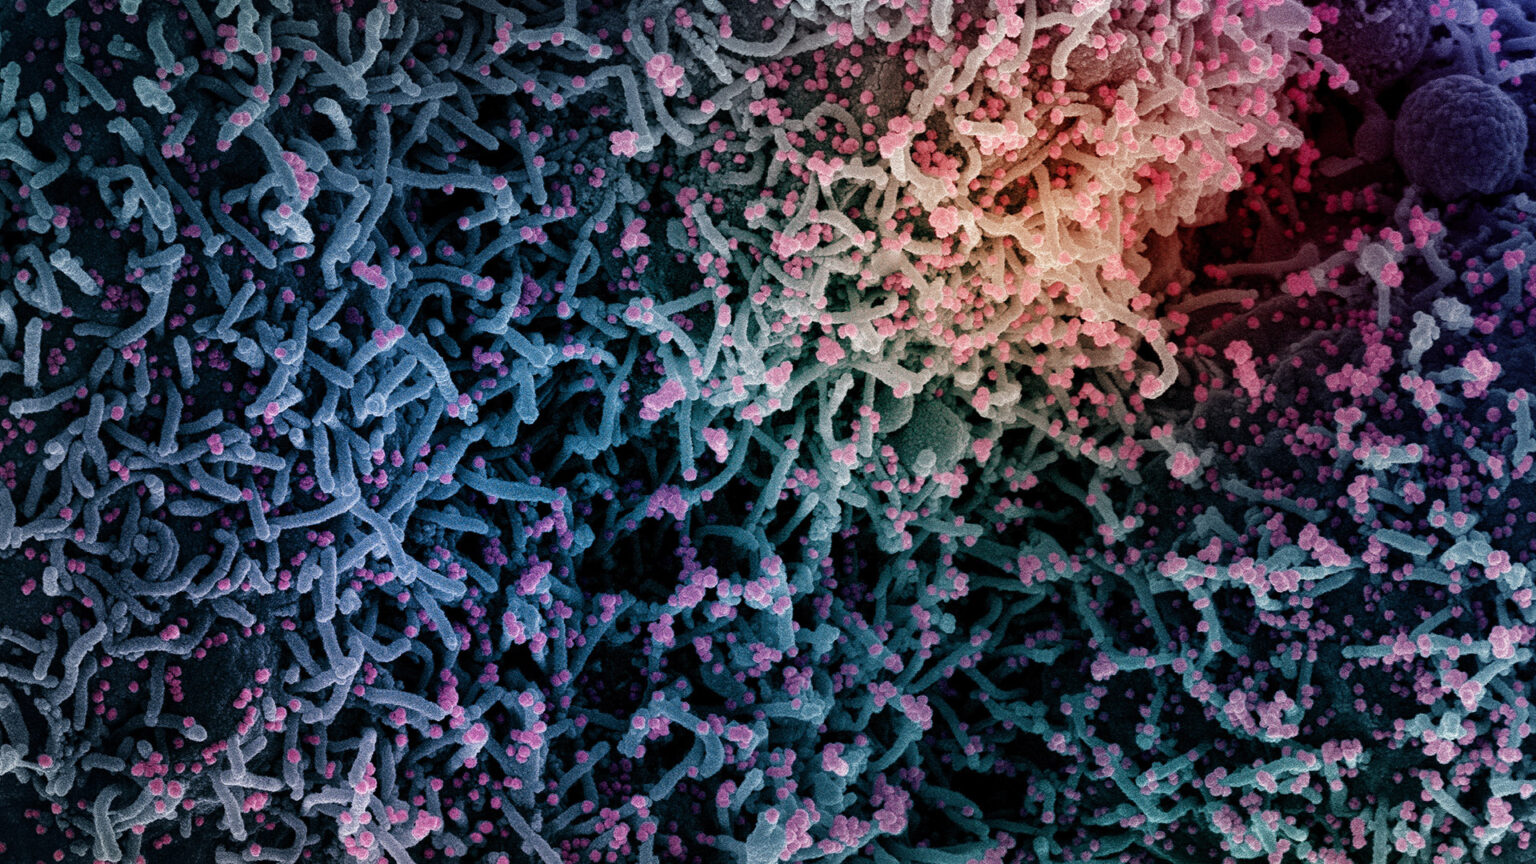 An electron micrograph that is colorized shows a cell infected with a variant strain of SARS-CoV-2 virus particles.